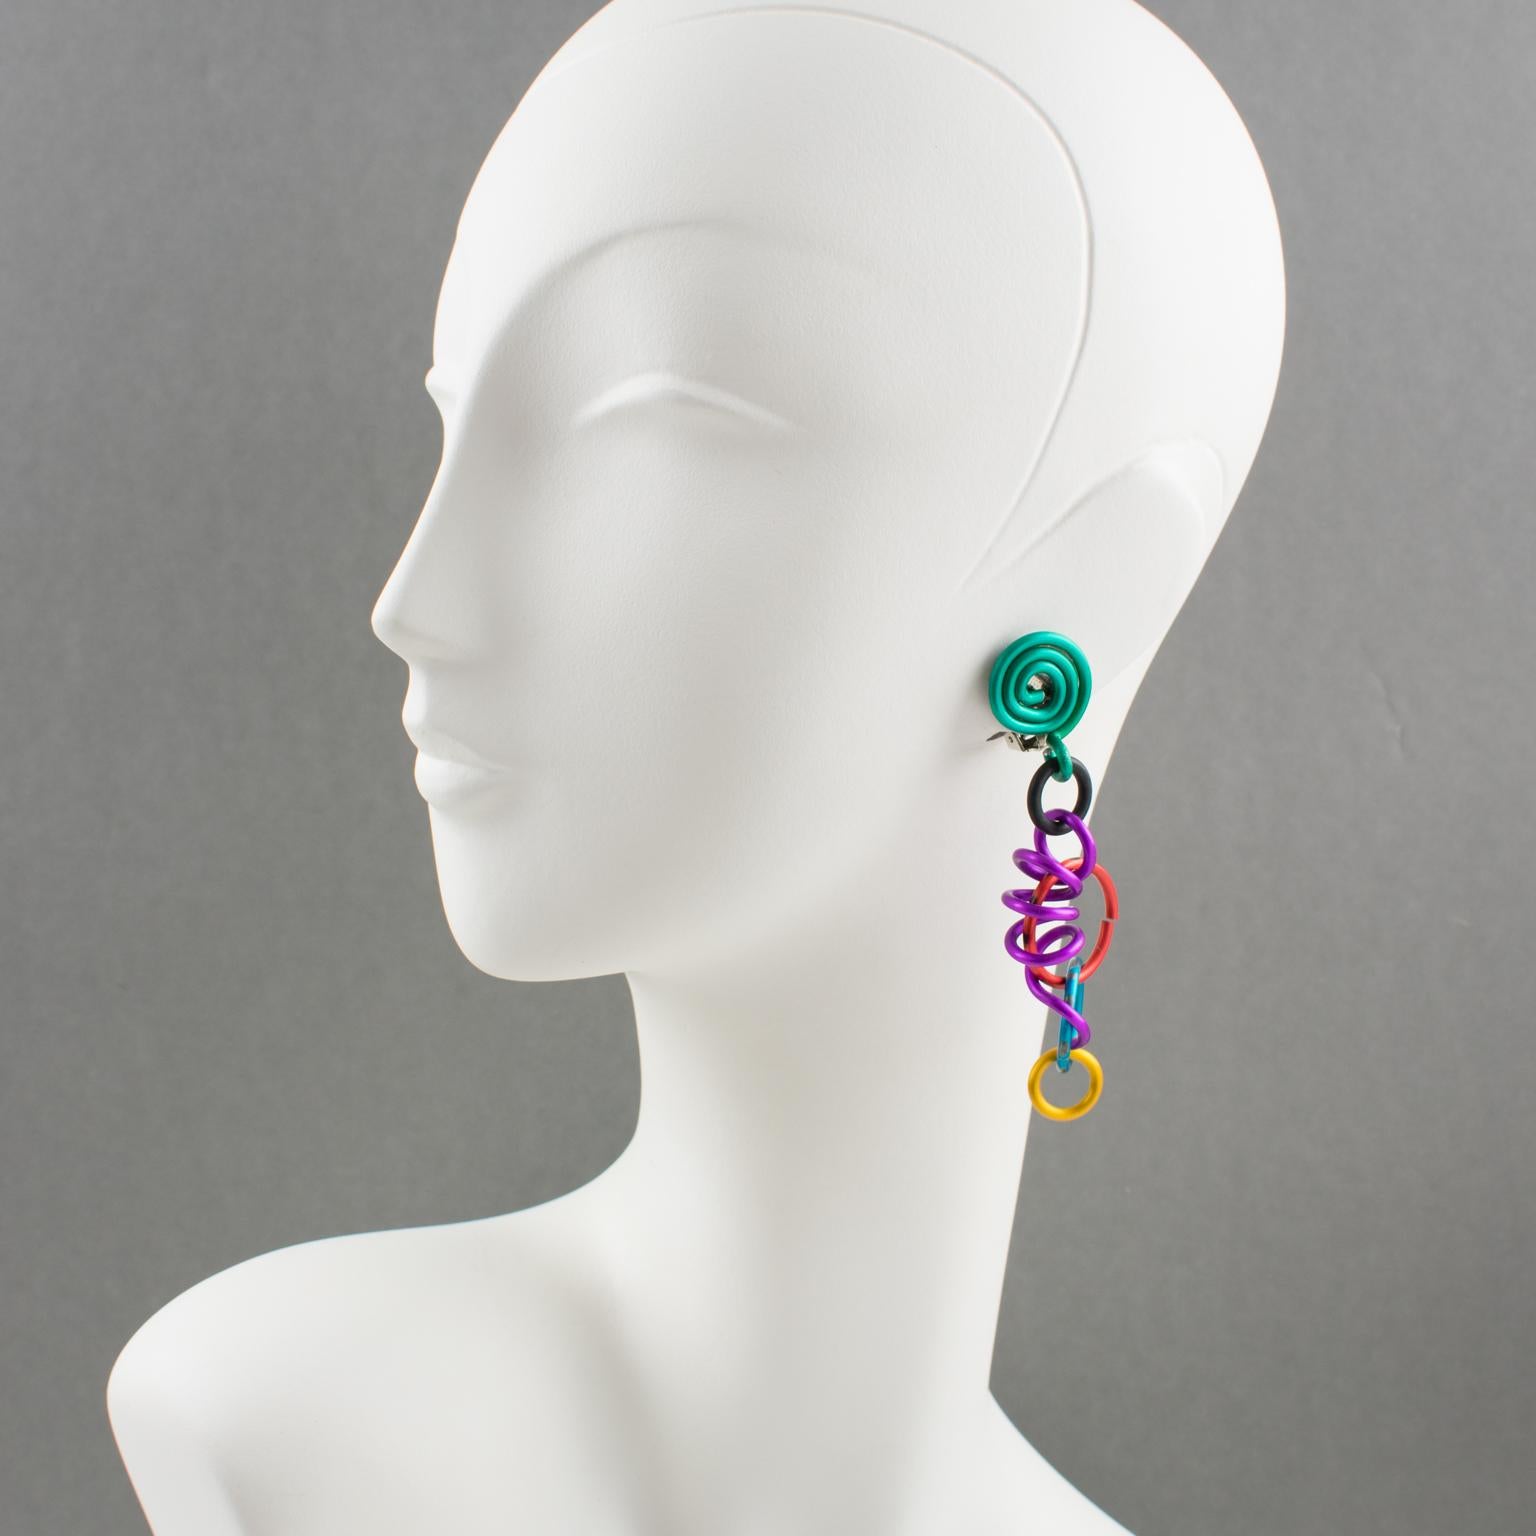 Rare elegant David Spada, New York signed dangling clip on earrings. Featuring a cool Space Age 1980s design with dangle articulated spiral coiled elements along with assorted size rings. Anodized aluminum metal with rich bright colors (turquoise,